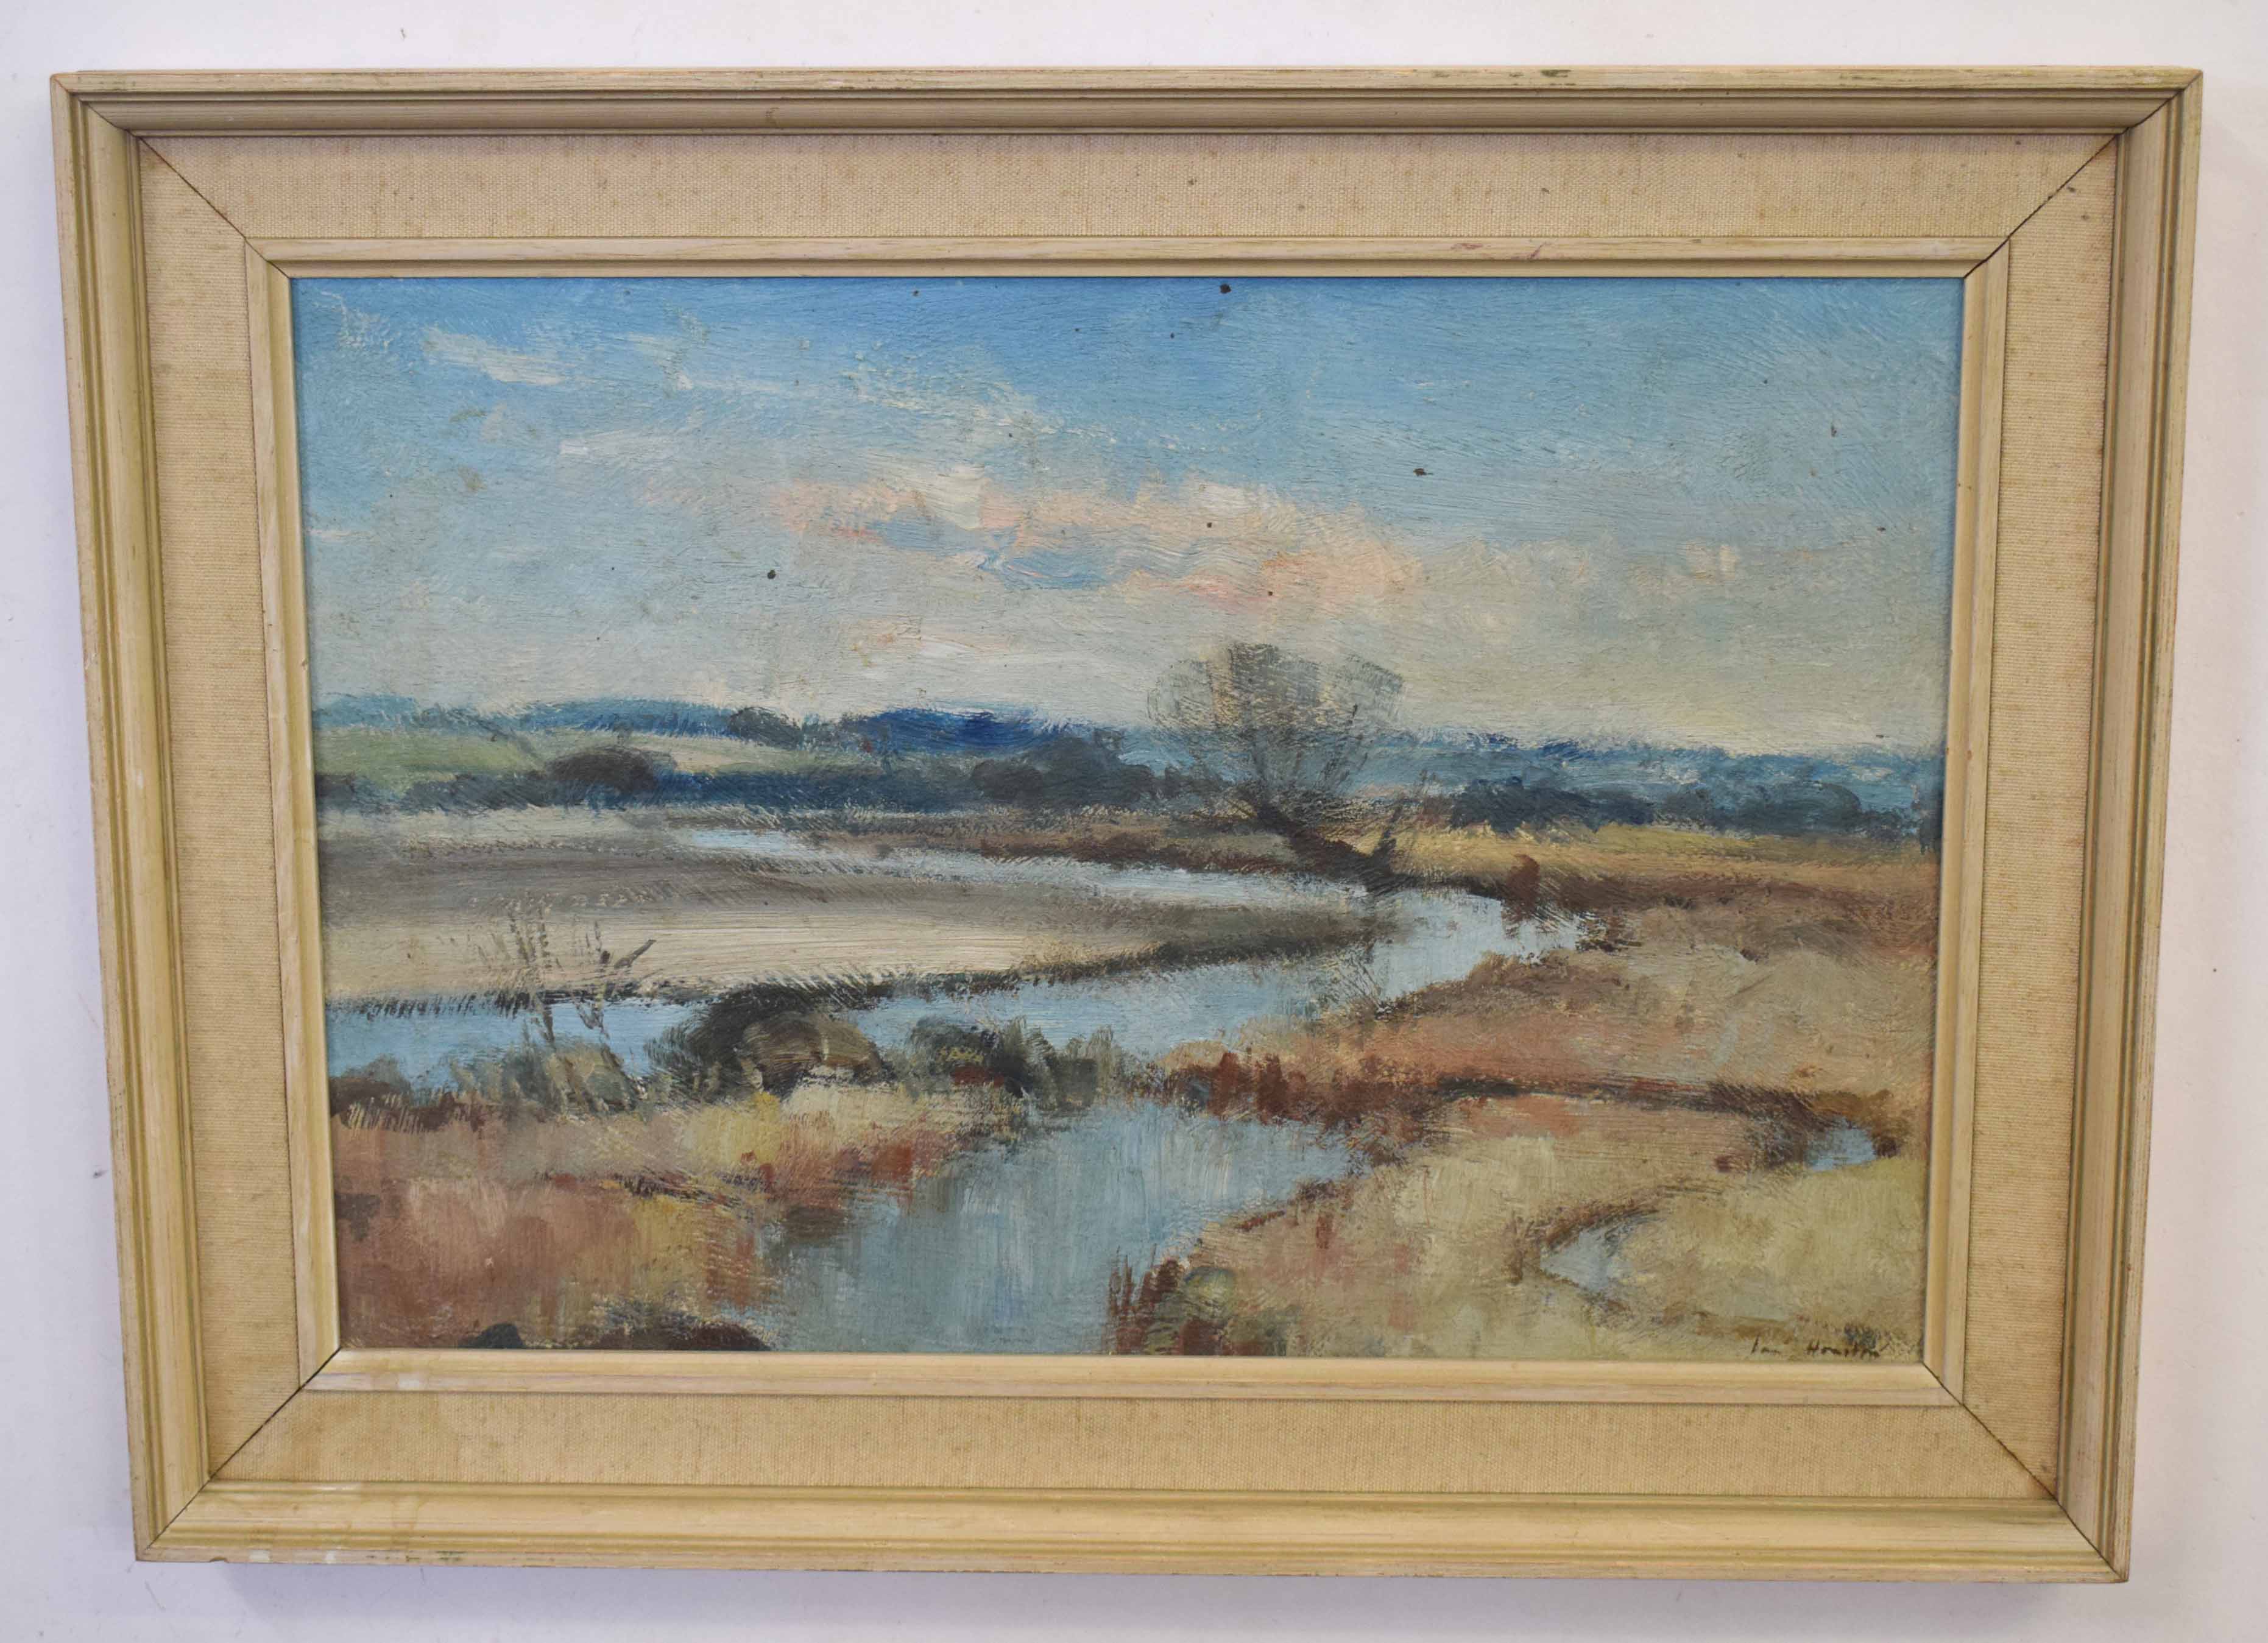 Ian Houston, signed oil on board, "Sunlight and shadow, River Yare", 26 x 39cm